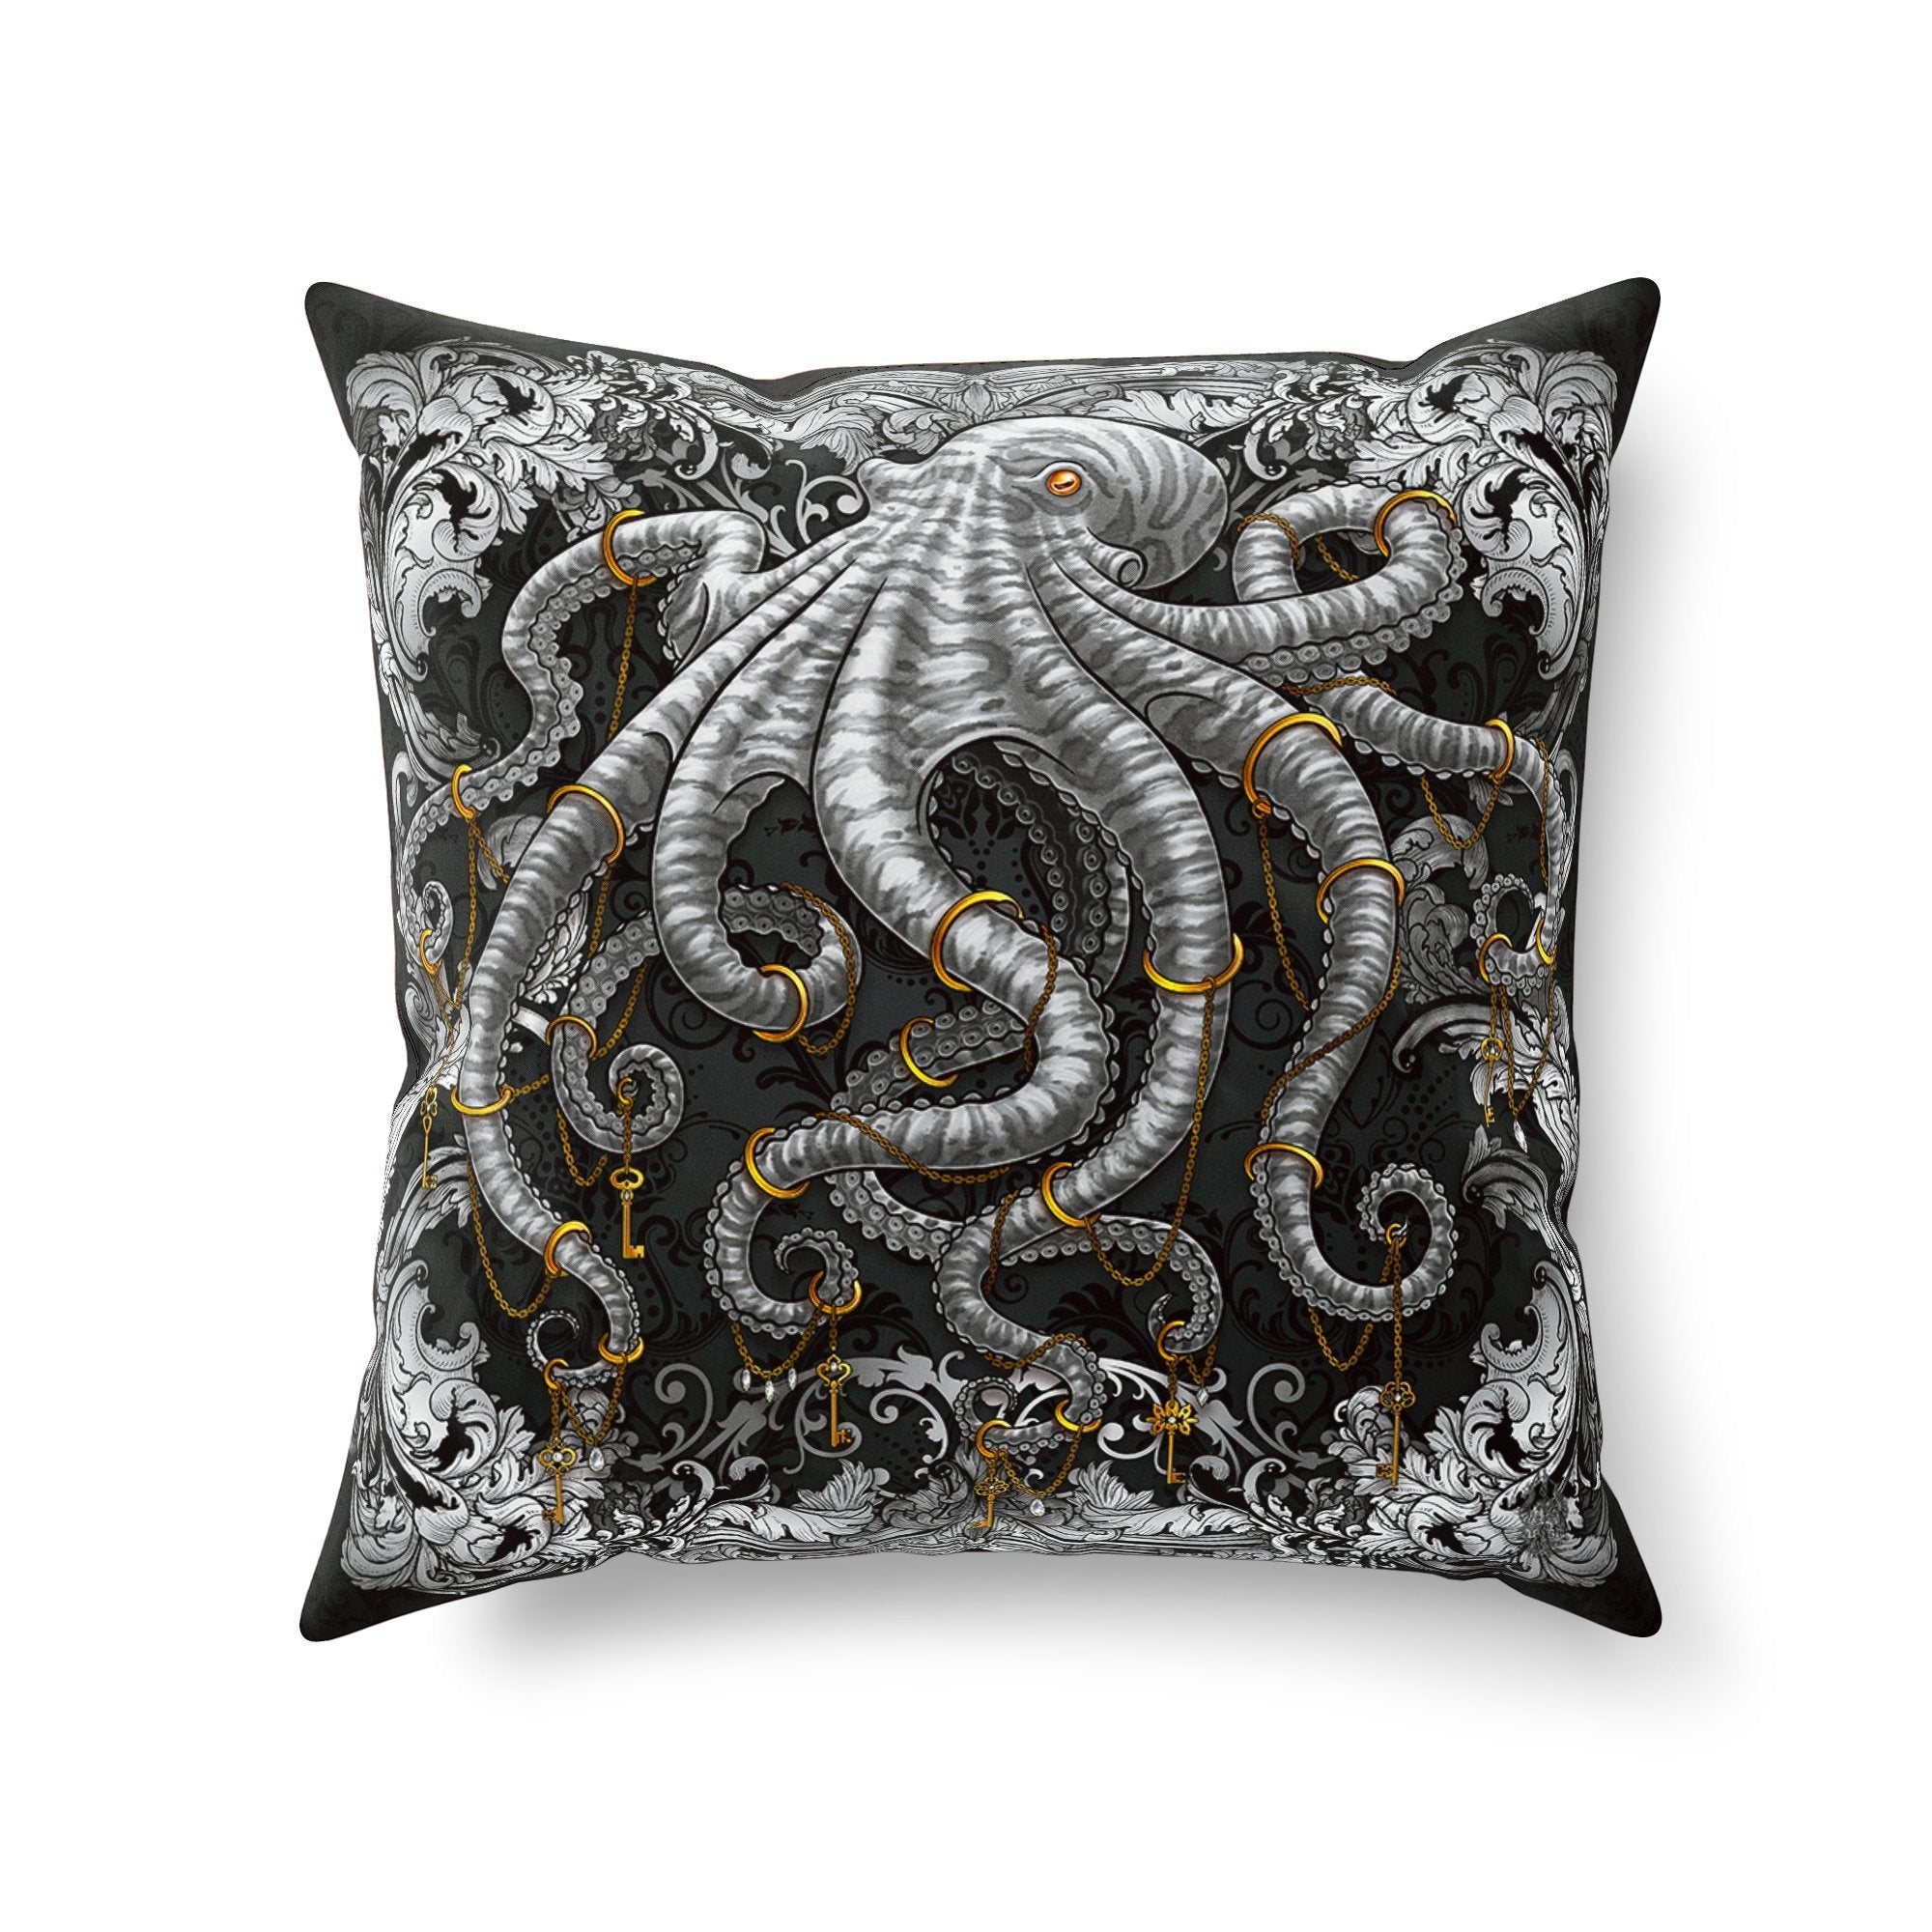 Indie Throw Pillow, Decorative Accent Cushion, Beach Home Decor, Indie and Eclectic Design, Alternative - Silver Octopus & Black - Abysm Internal